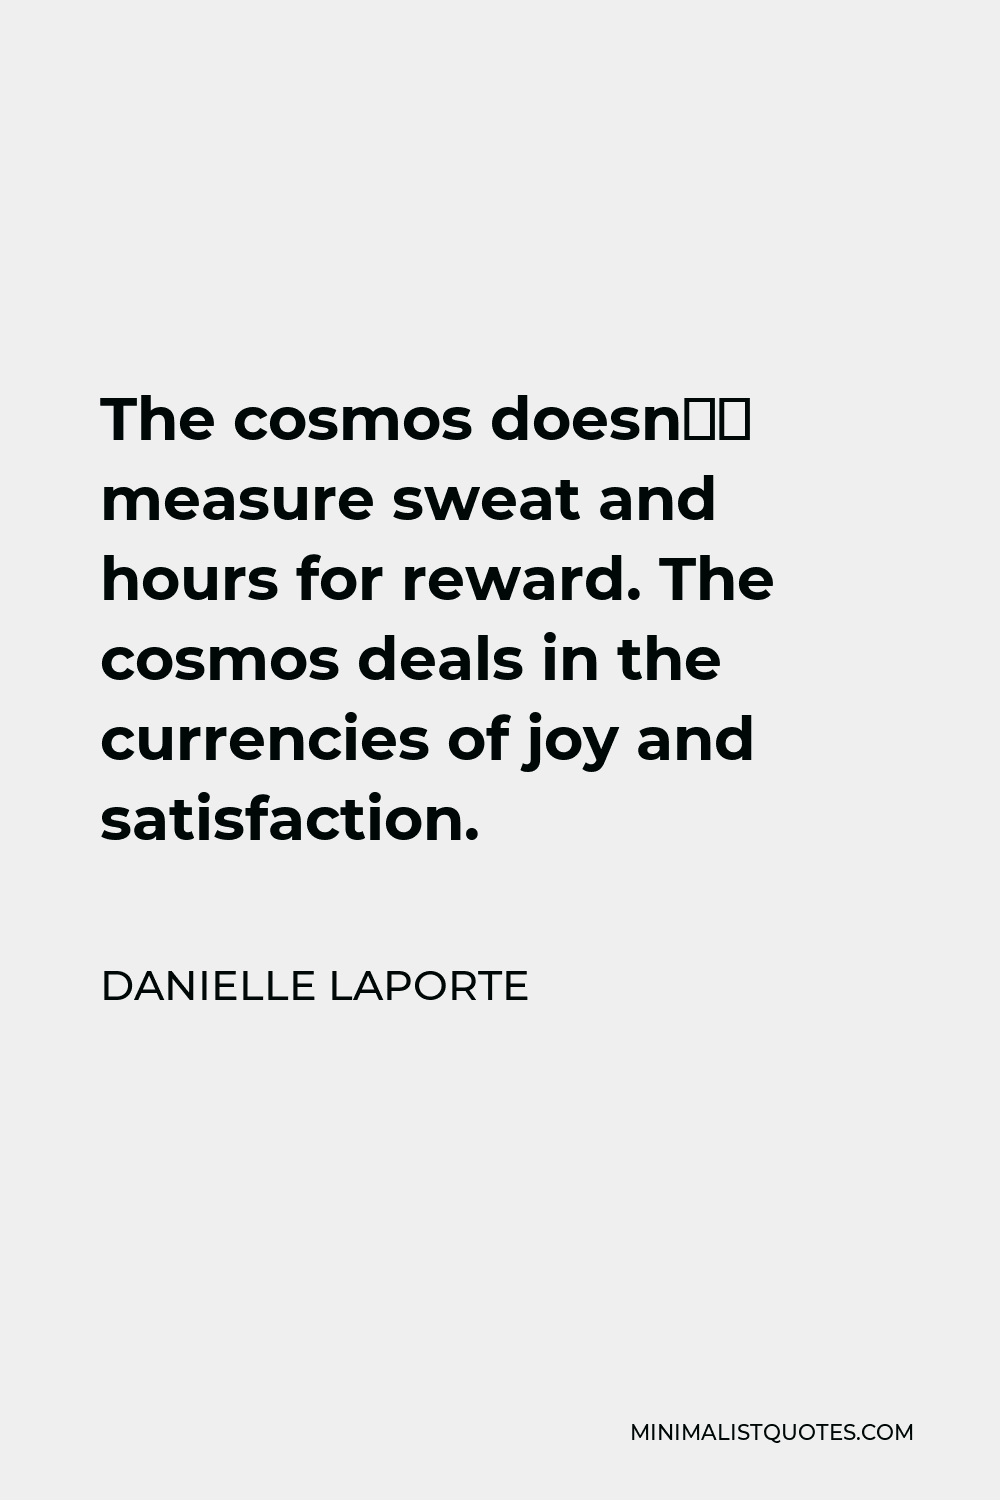 Danielle LaPorte Quote - The cosmos doesn’t measure sweat and hours for reward. The cosmos deals in the currencies of joy and satisfaction.